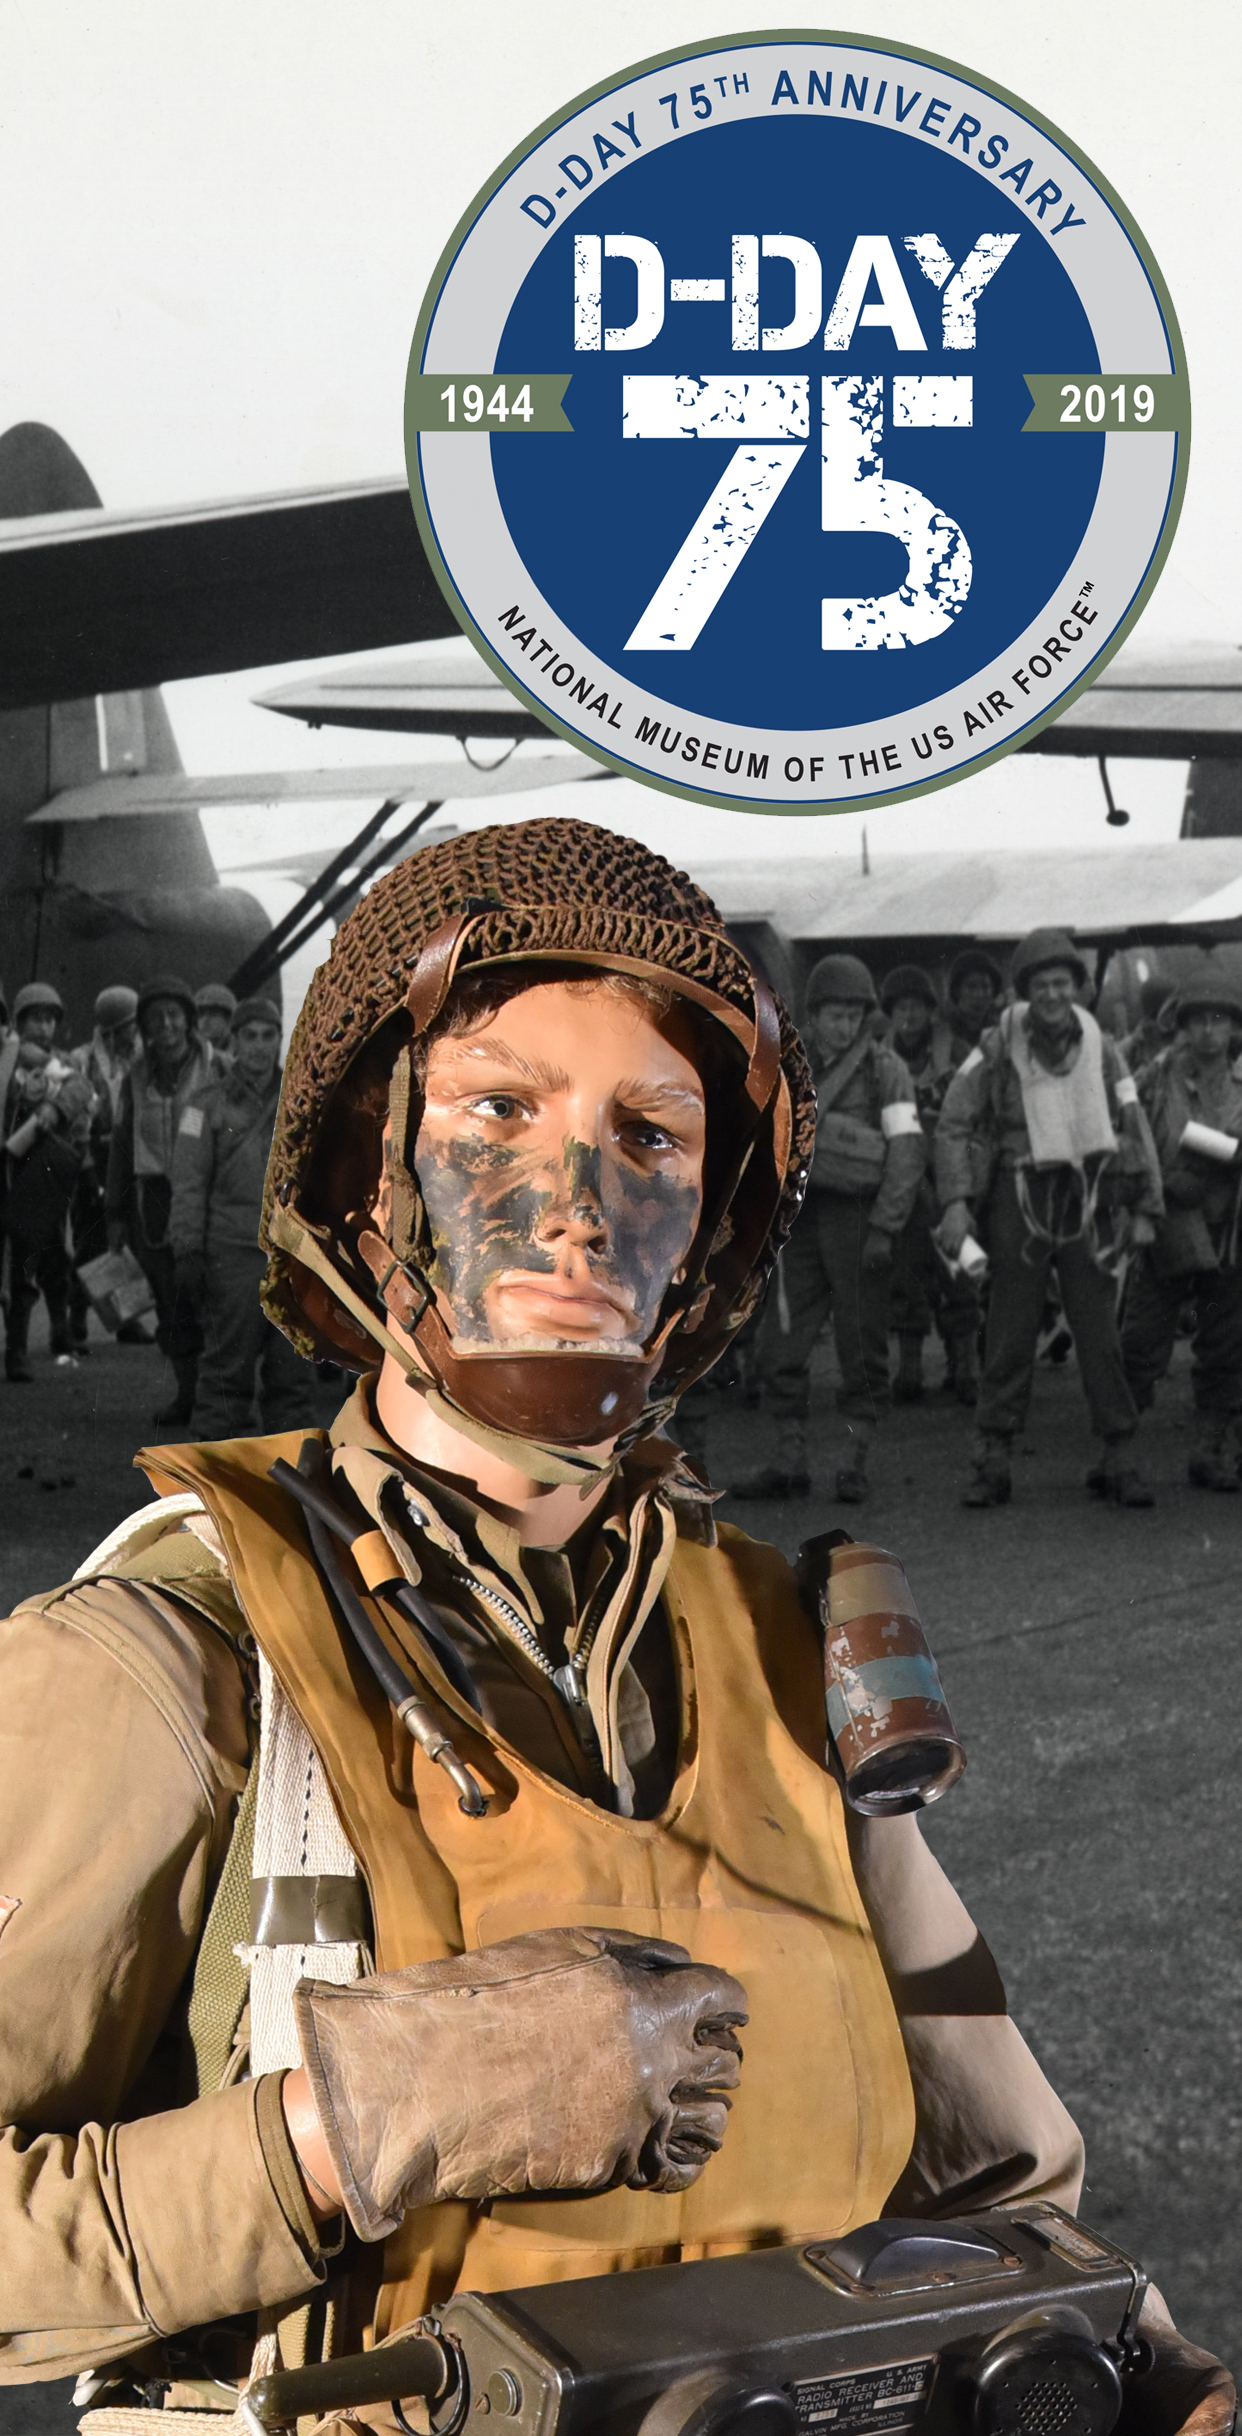 75th%20DDay%20for%20App%20with%20Paratrooper_1.jpg